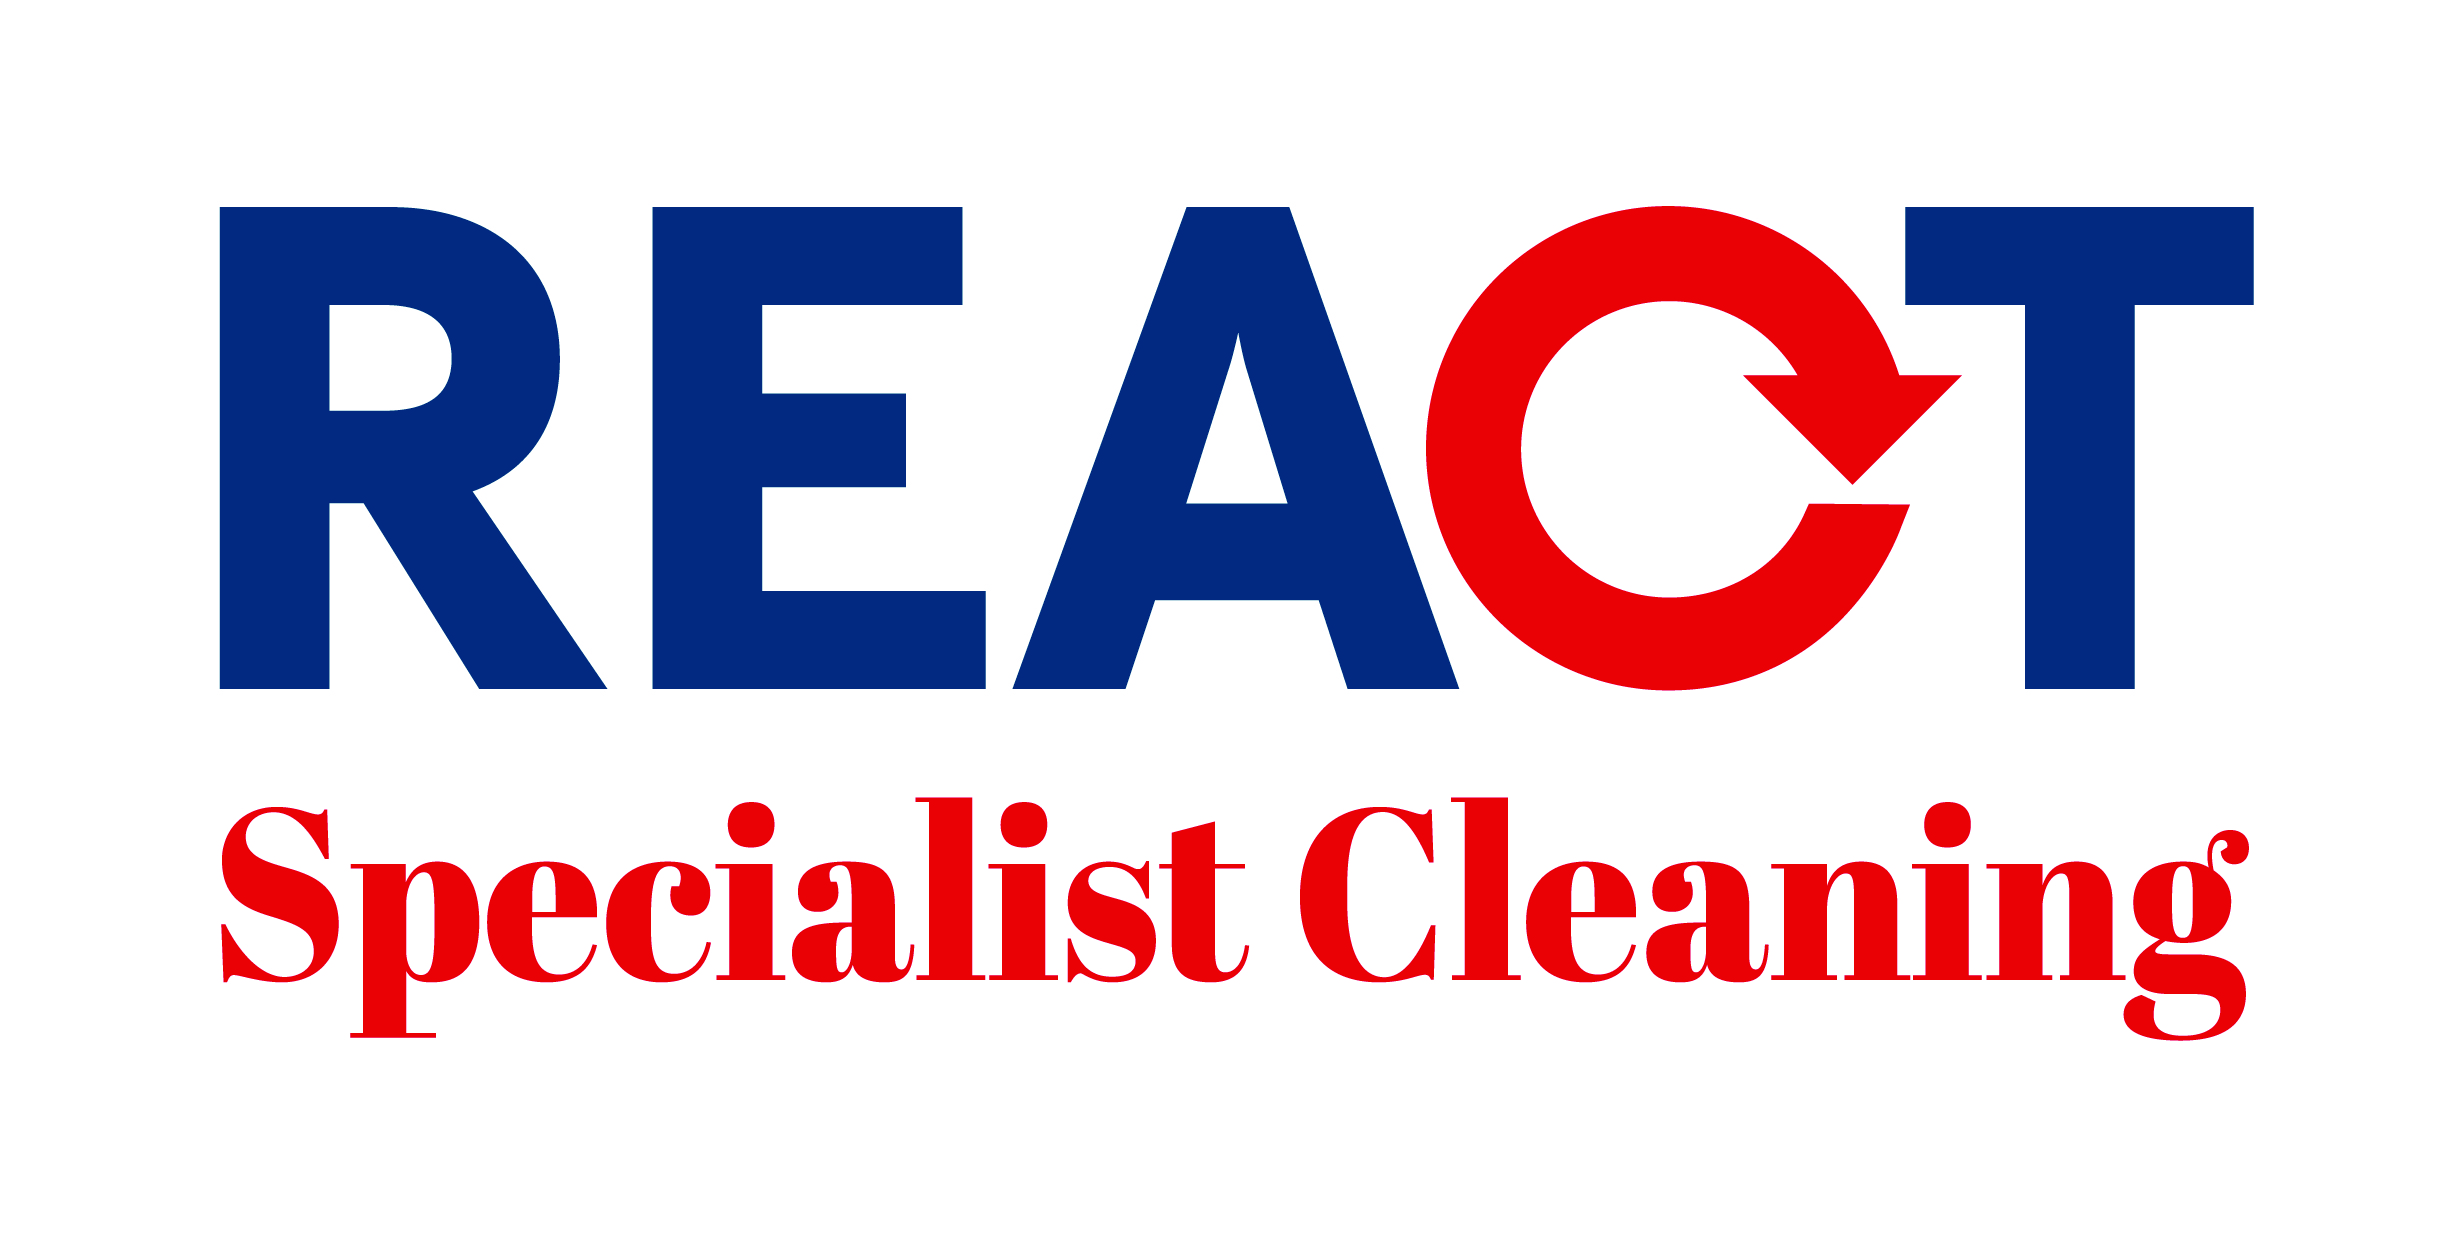 REACT Specialist Cleaning